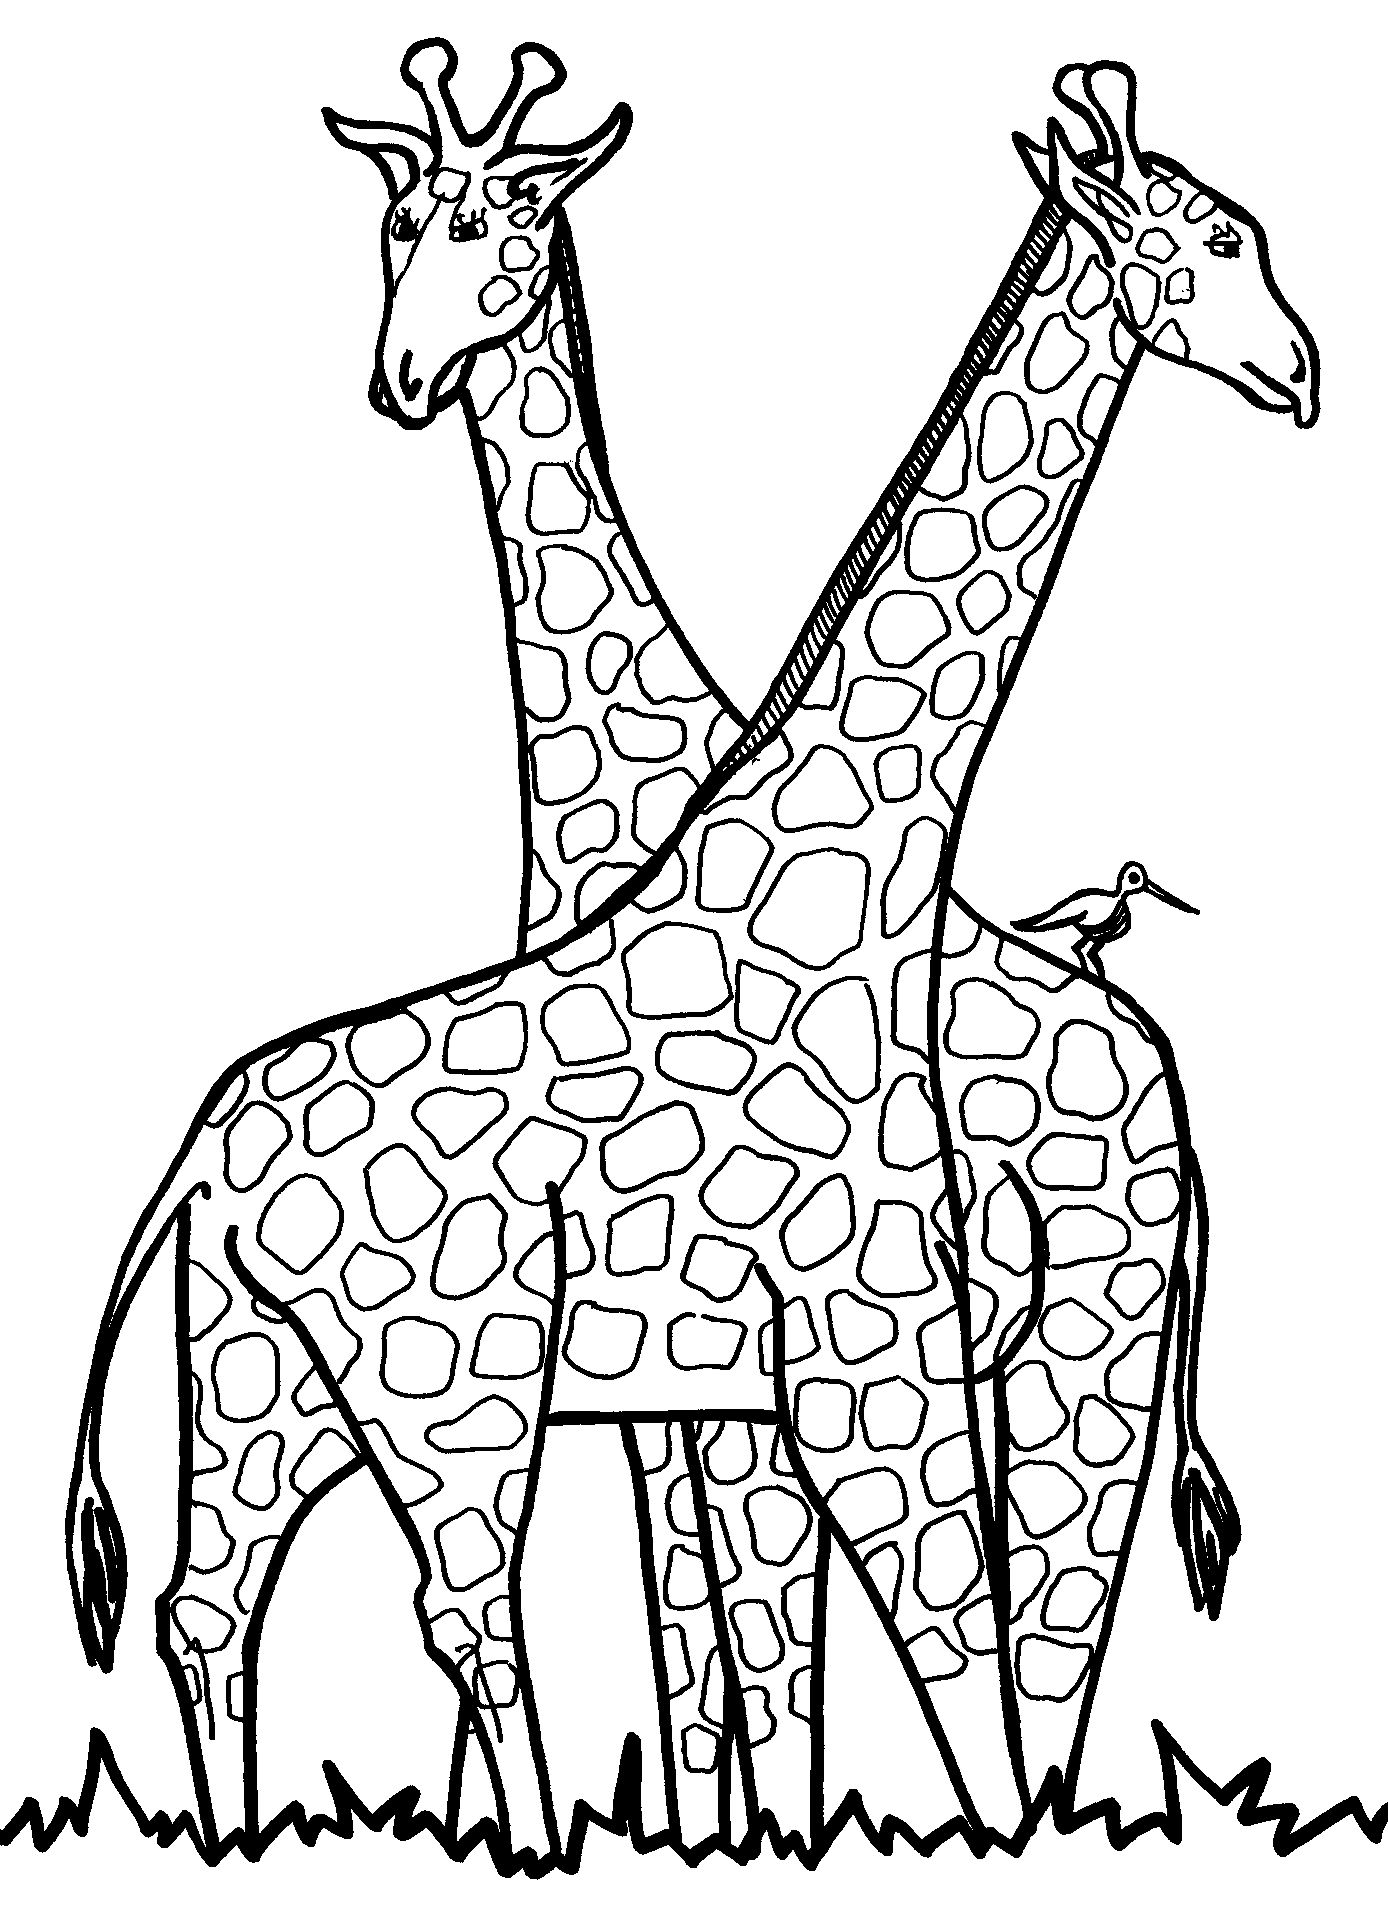 Coloring Page - Giraffe - ClipArt Best - ClipArt Best